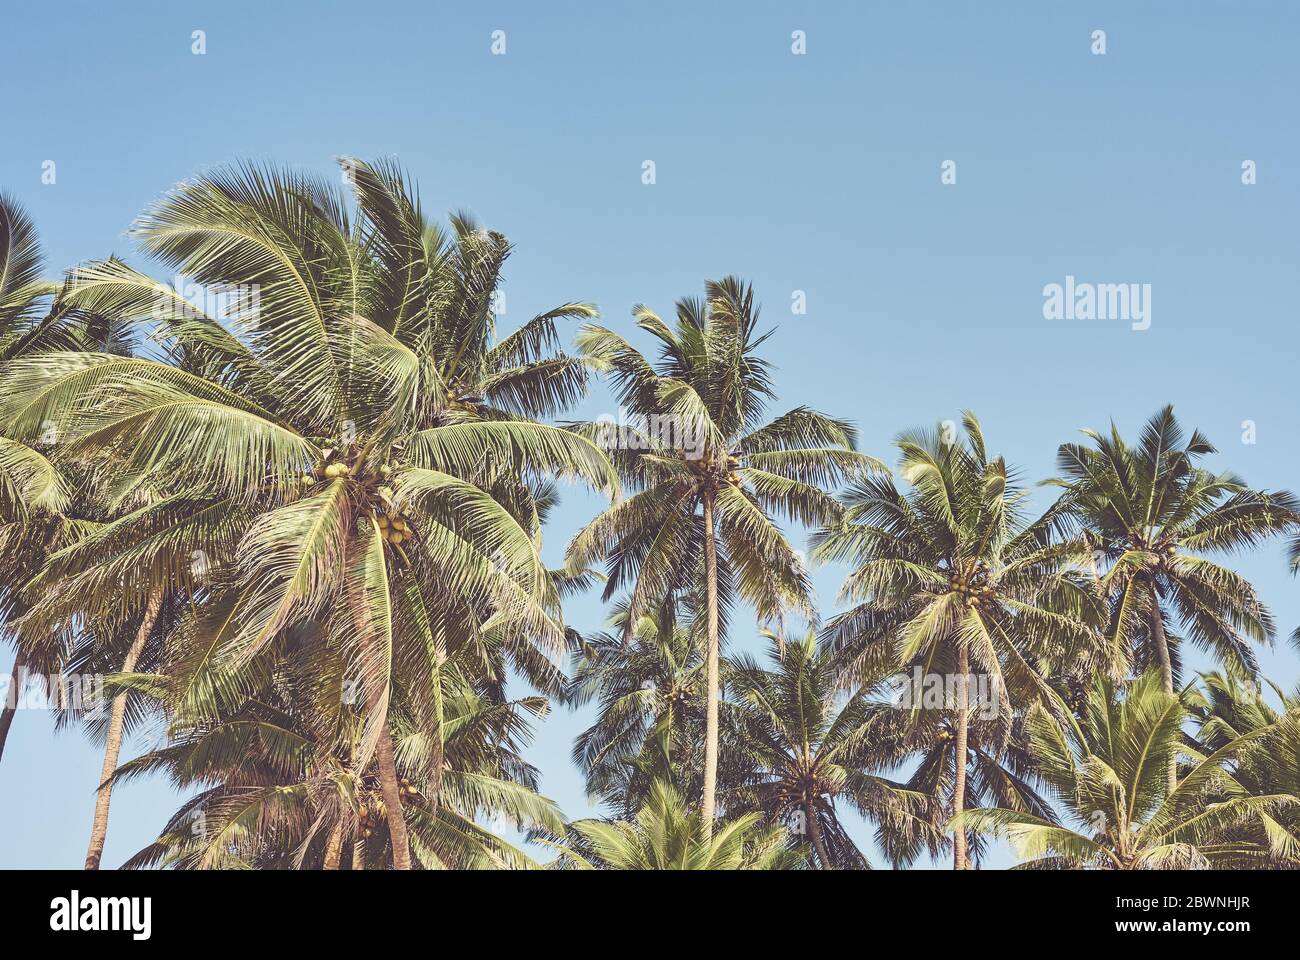 Retro toned picture of coconut palm trees against the blue sky. Stock Photo